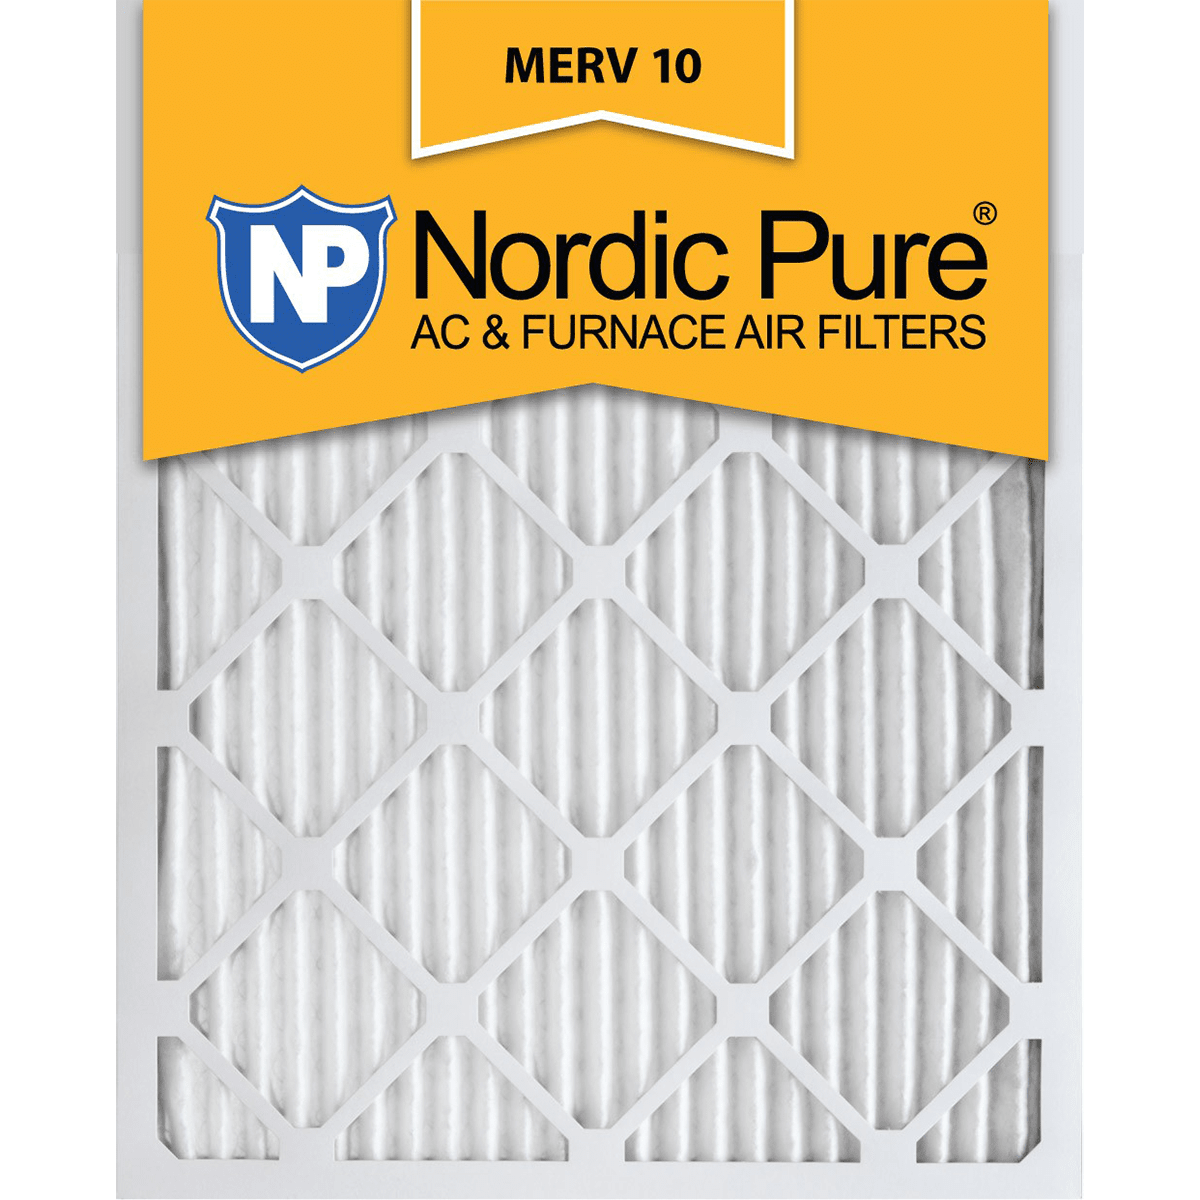 Nordic Pure MERV 10 Pleated Furnace Filter 16x25x1 6-Pack (16x25x1M10-6)